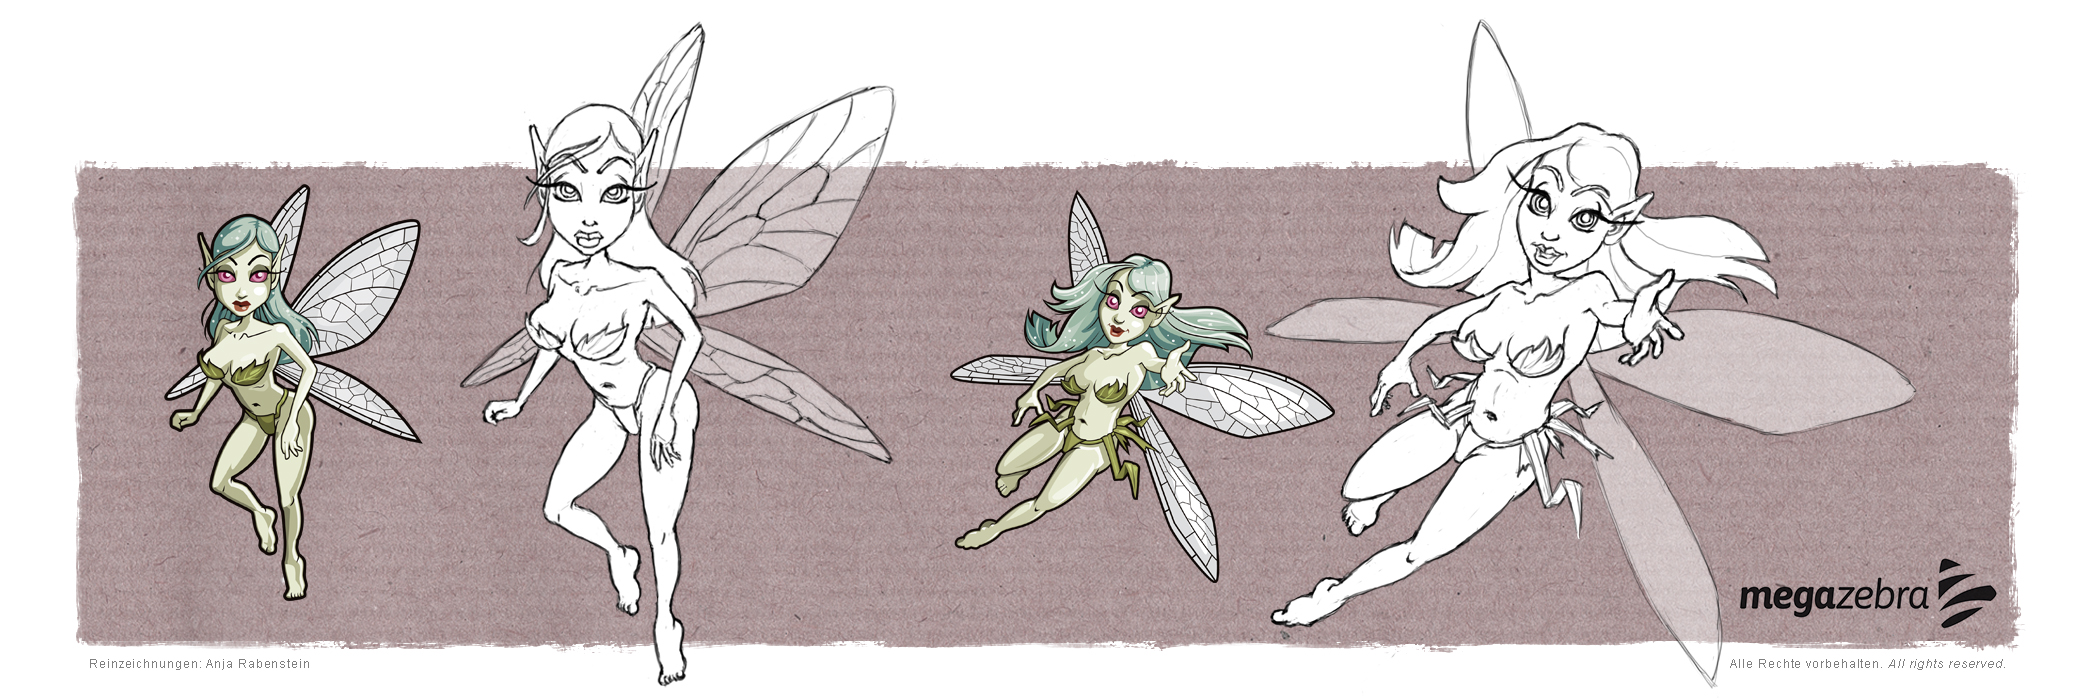 Character Development of Fairy Tale figures for a social browser game